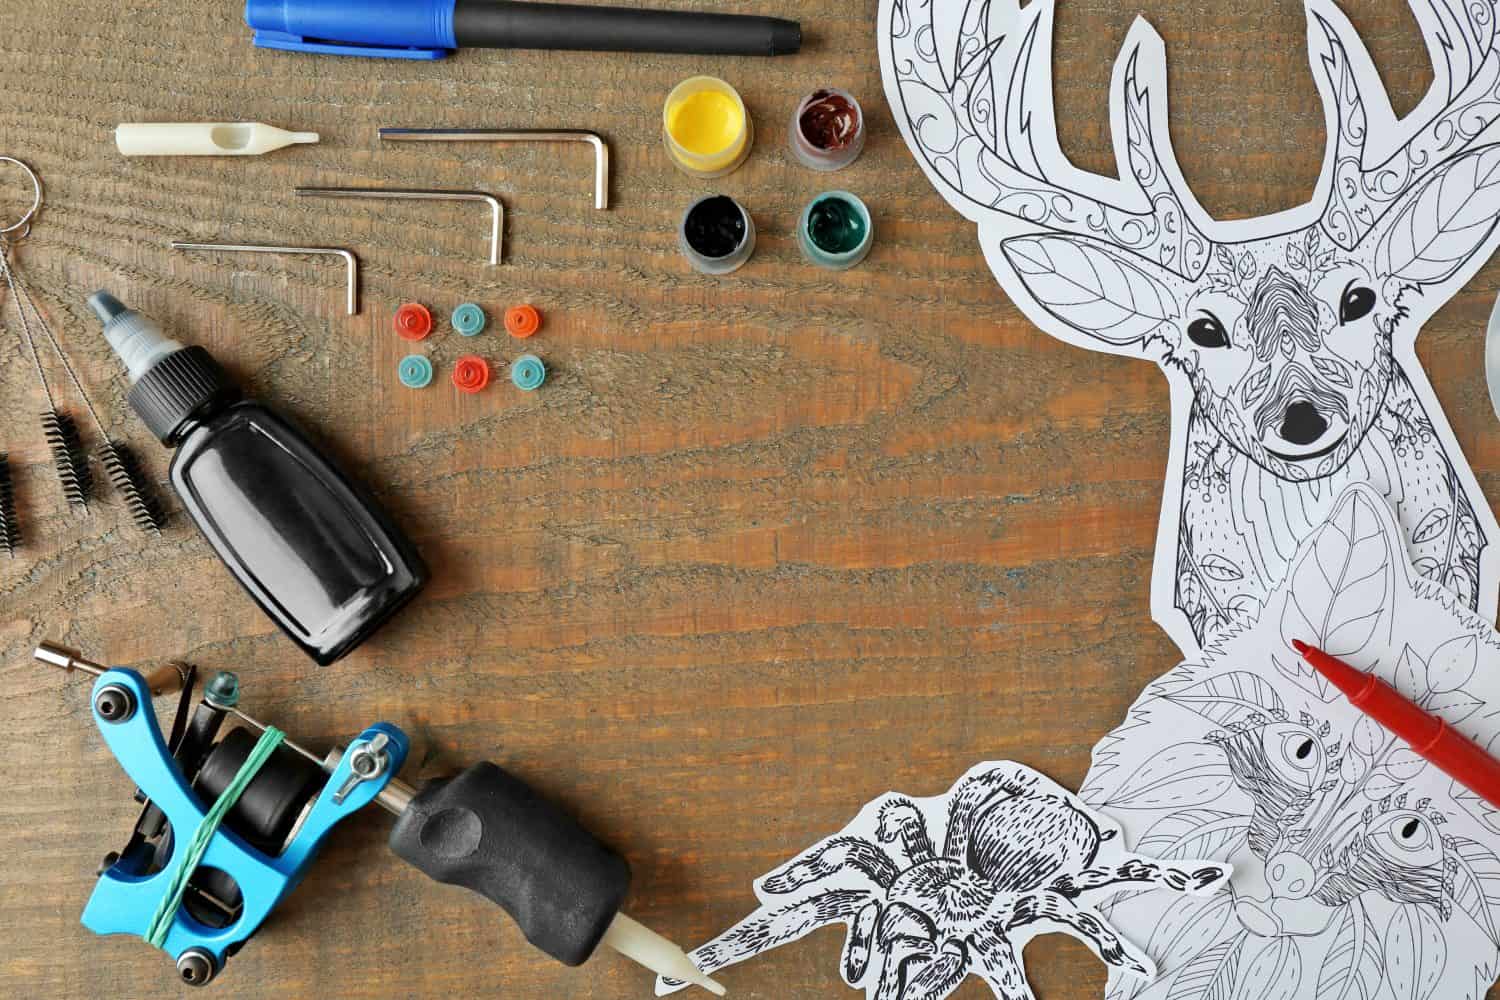 Tattoo machine and supplies on wooden background